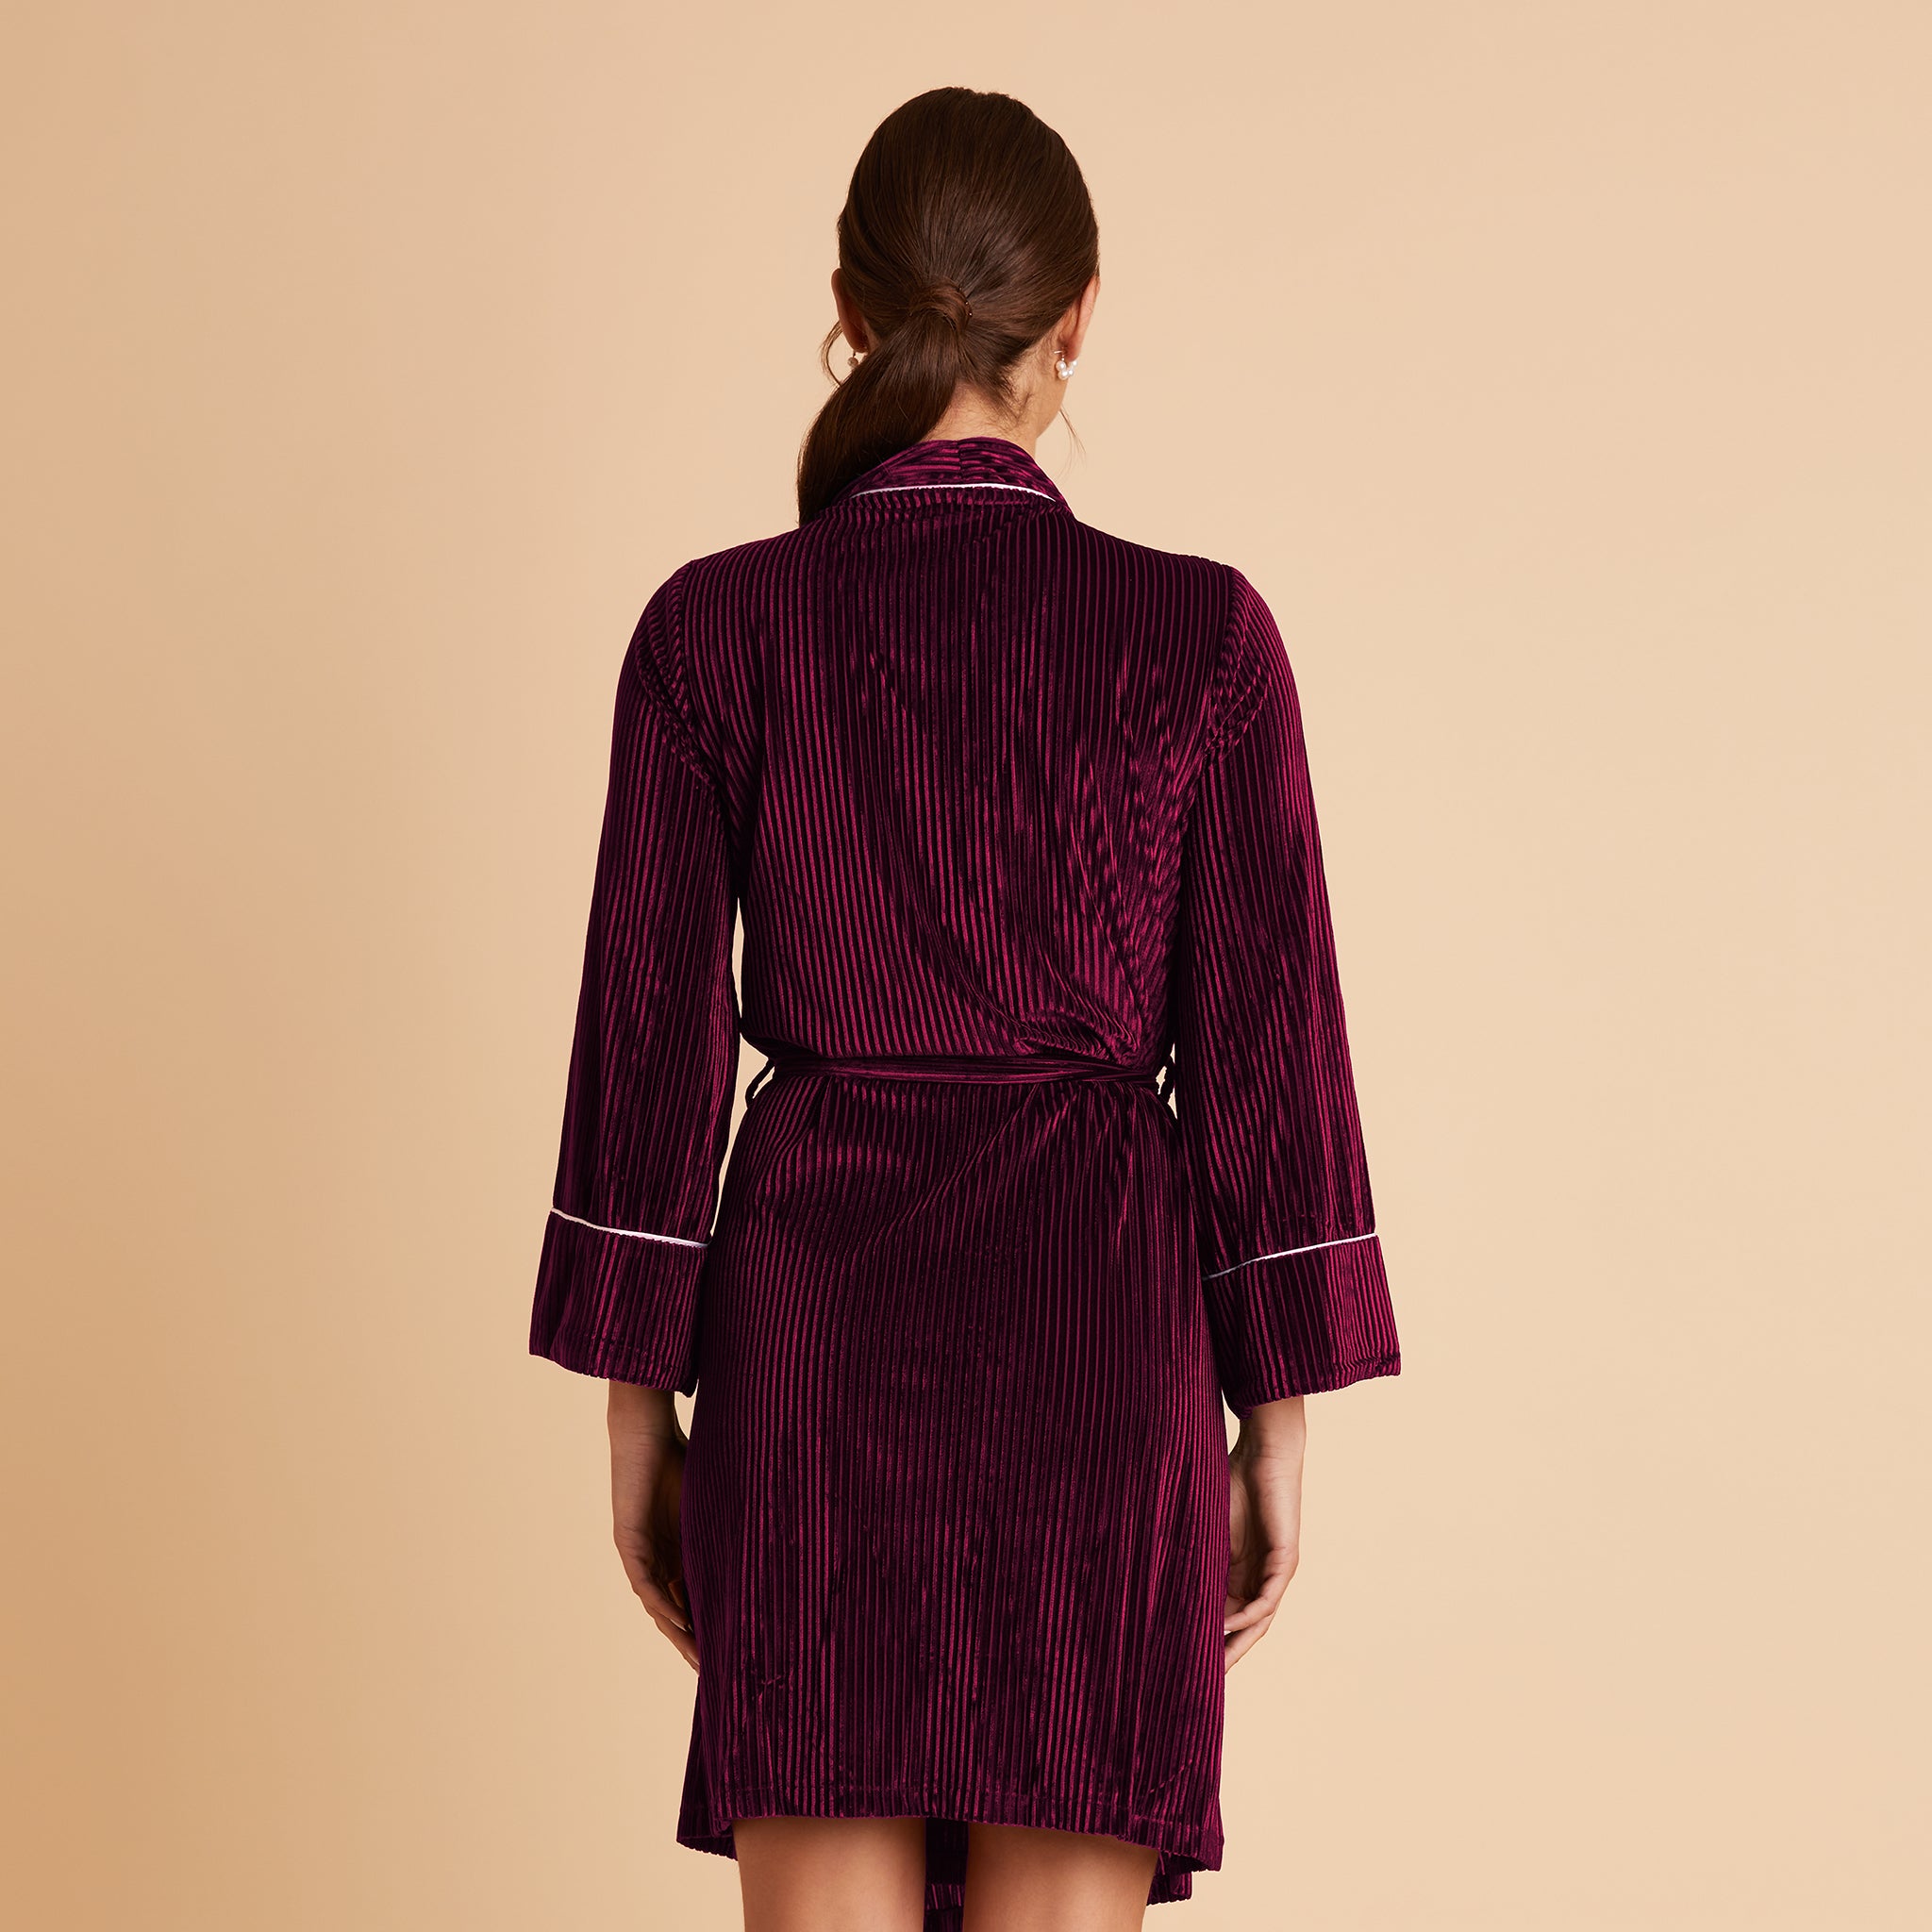 Velvet Ribbed Robe in Cabernet by Birdy Grey, back view